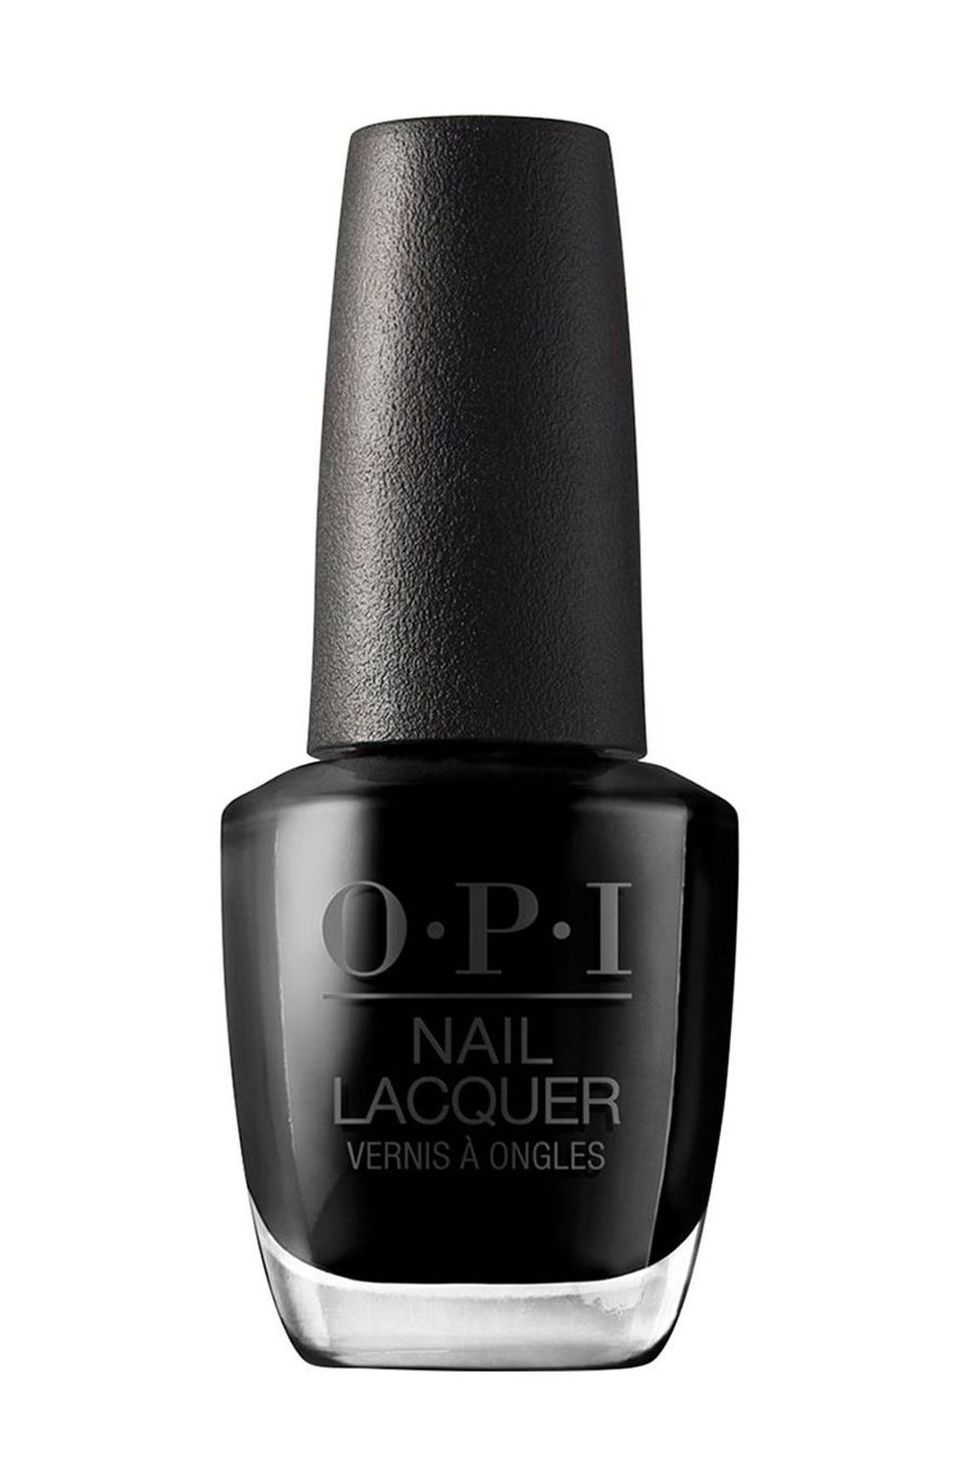 OPI Nail Lacquer in Black Onyx